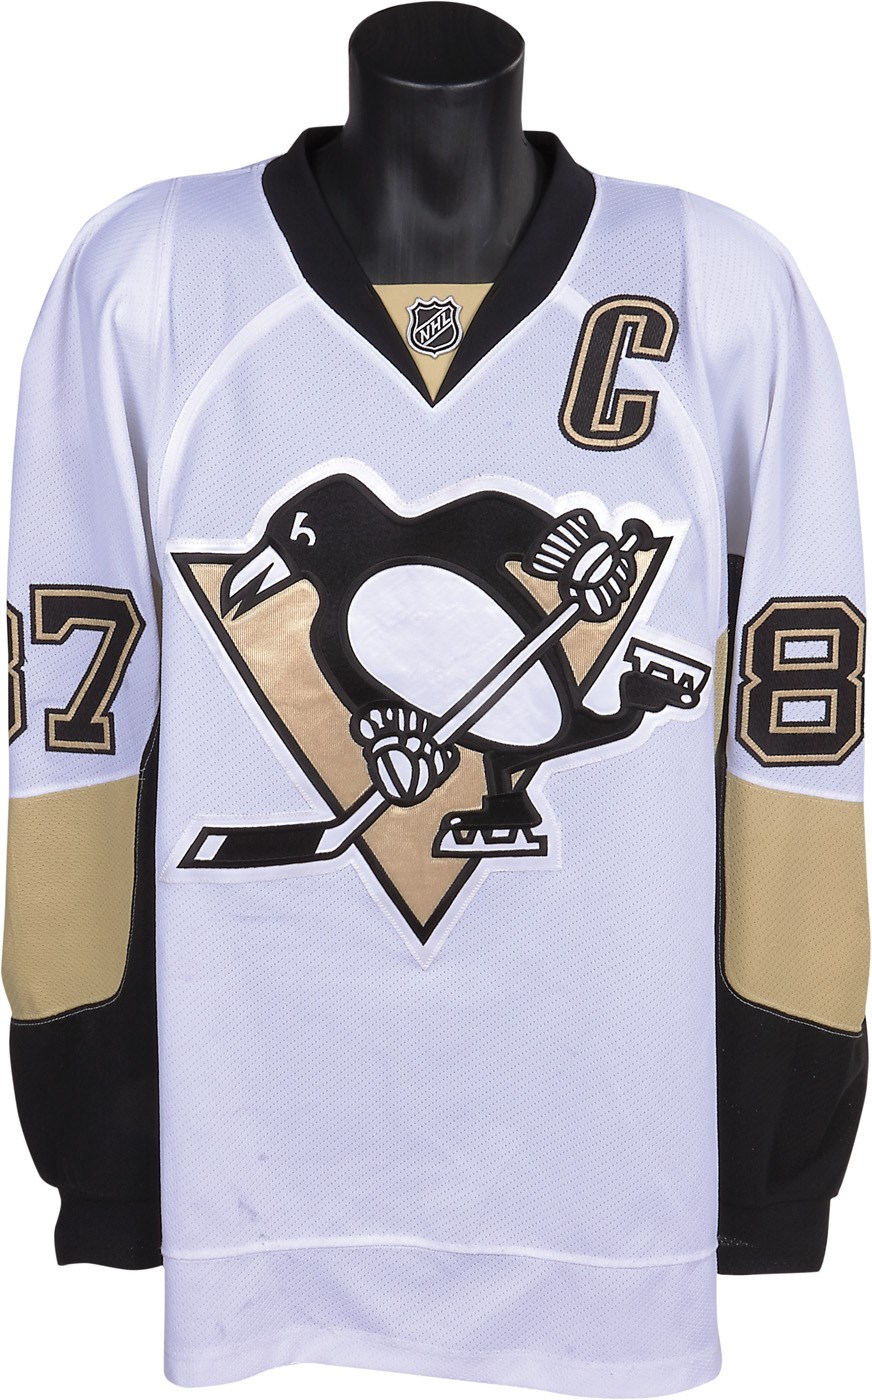 Hockey - 2015-16 Sidney Crosby Game Worn Pittsburgh Penguins Jersey - Photo-Matched & Worn in 17 Games (Penguins LOA & Jersey Trak)